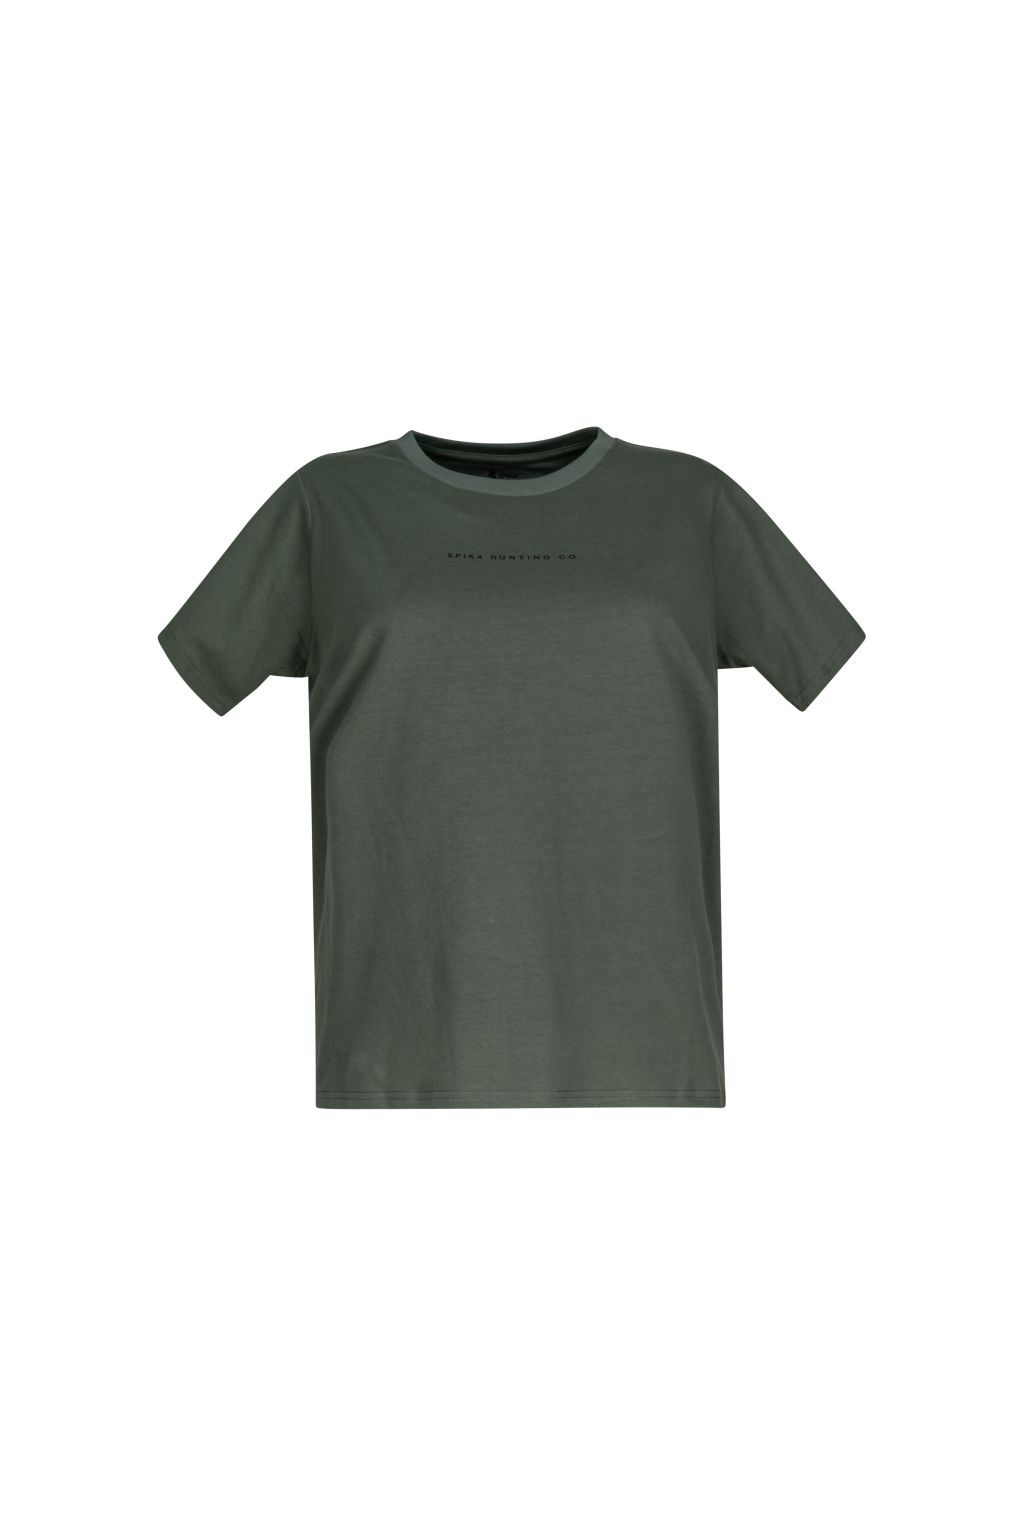 Spika GO Scope Womens T-Shirt - Teal - XS - Mansfield Hunting & Fishing - Products to prepare for Corona Virus